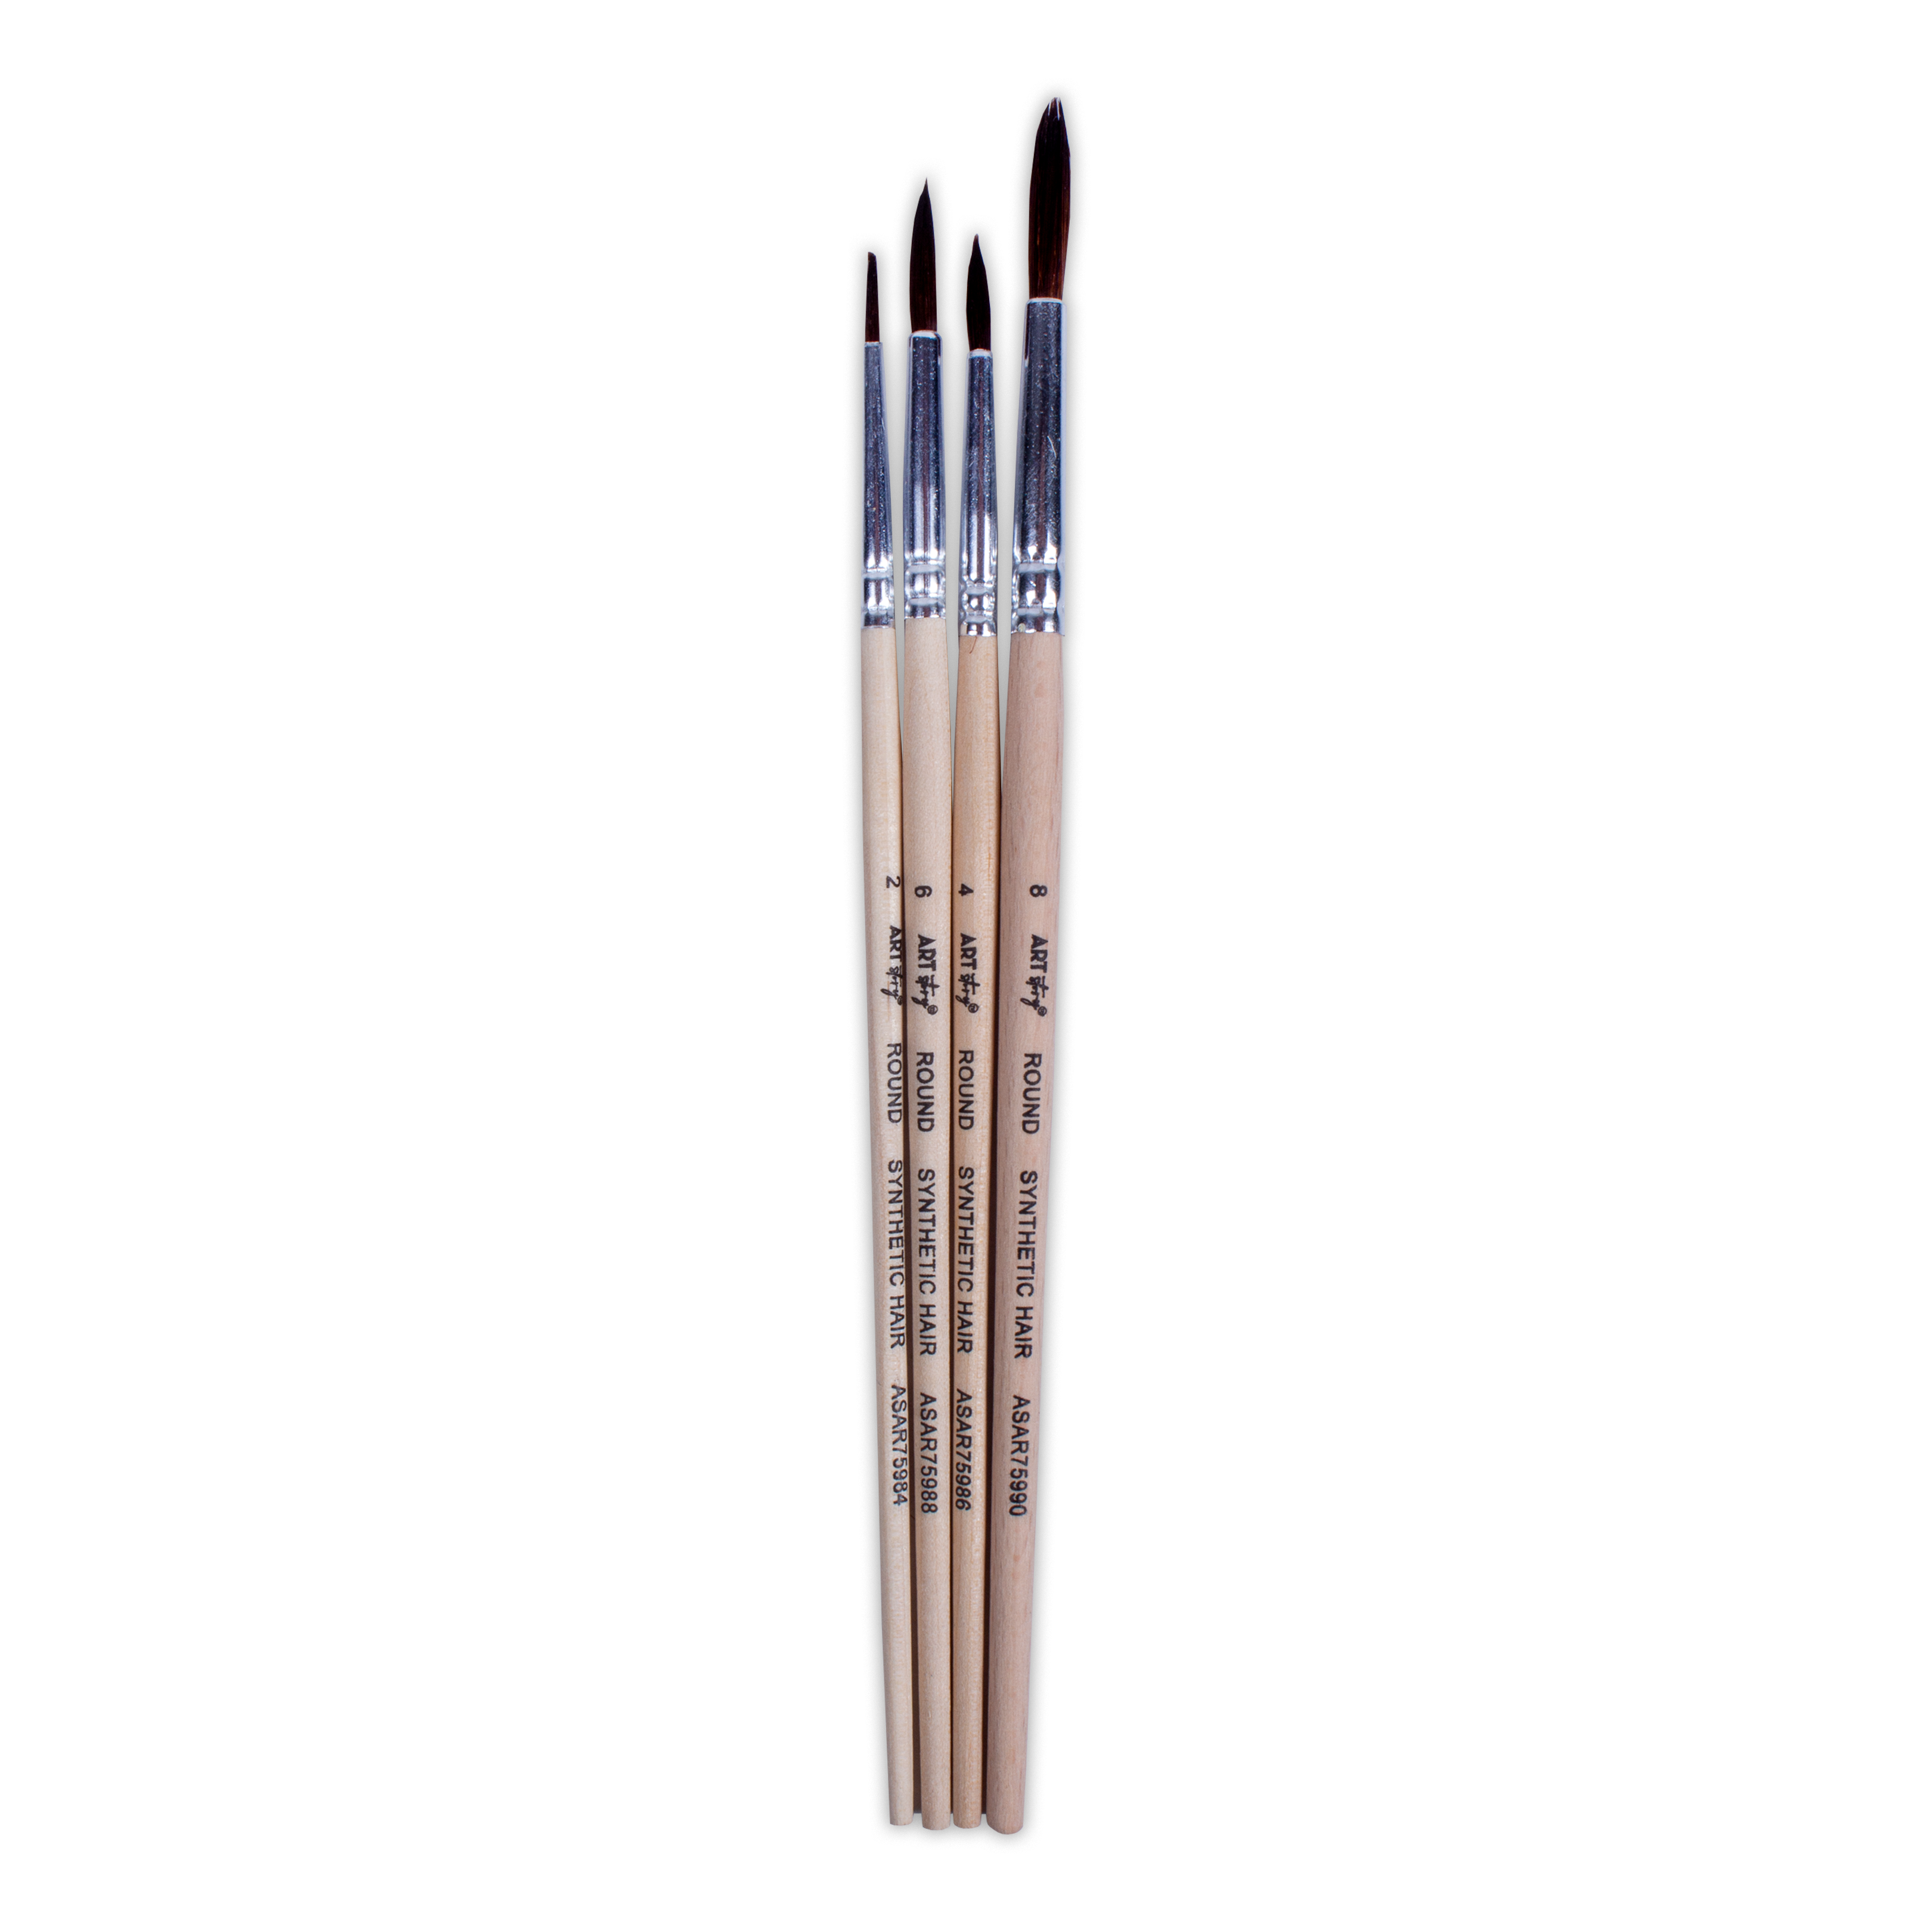 Watercolour Brush Round Synthetic Hair Size 24 6 8 Set of 4pc